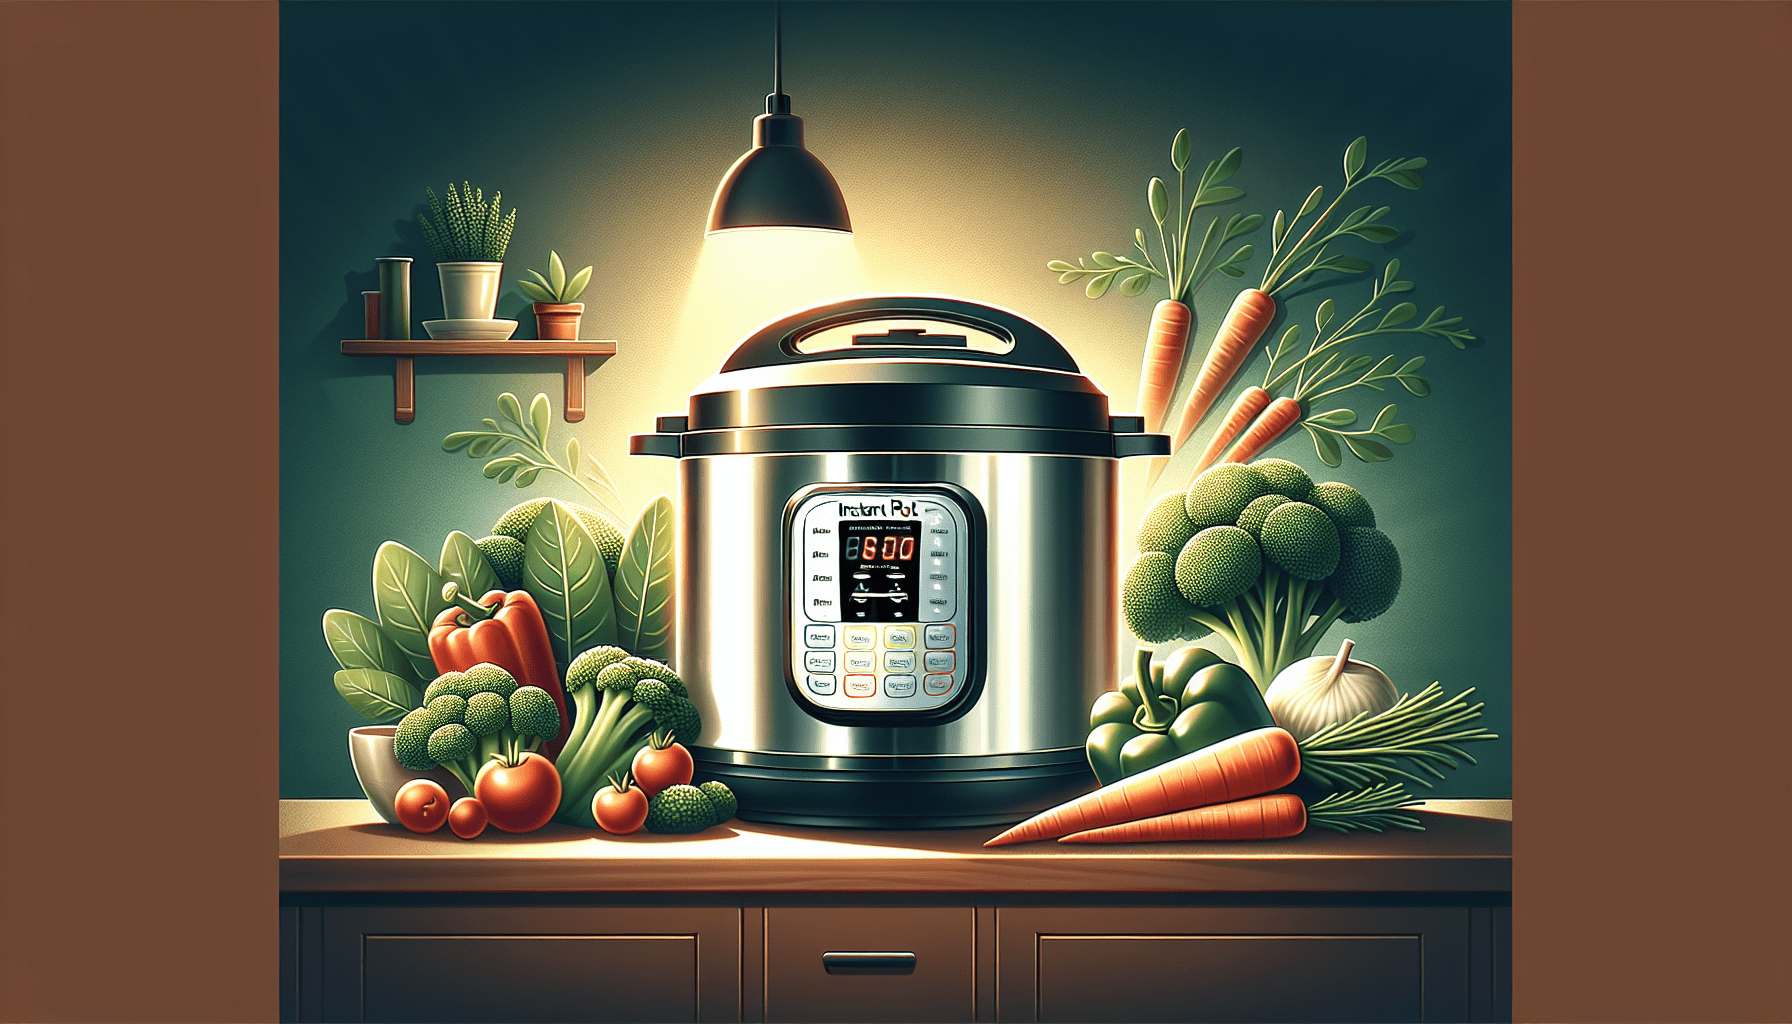 Delicious Vegetarian Recipes Made Easy with the Instant Pot